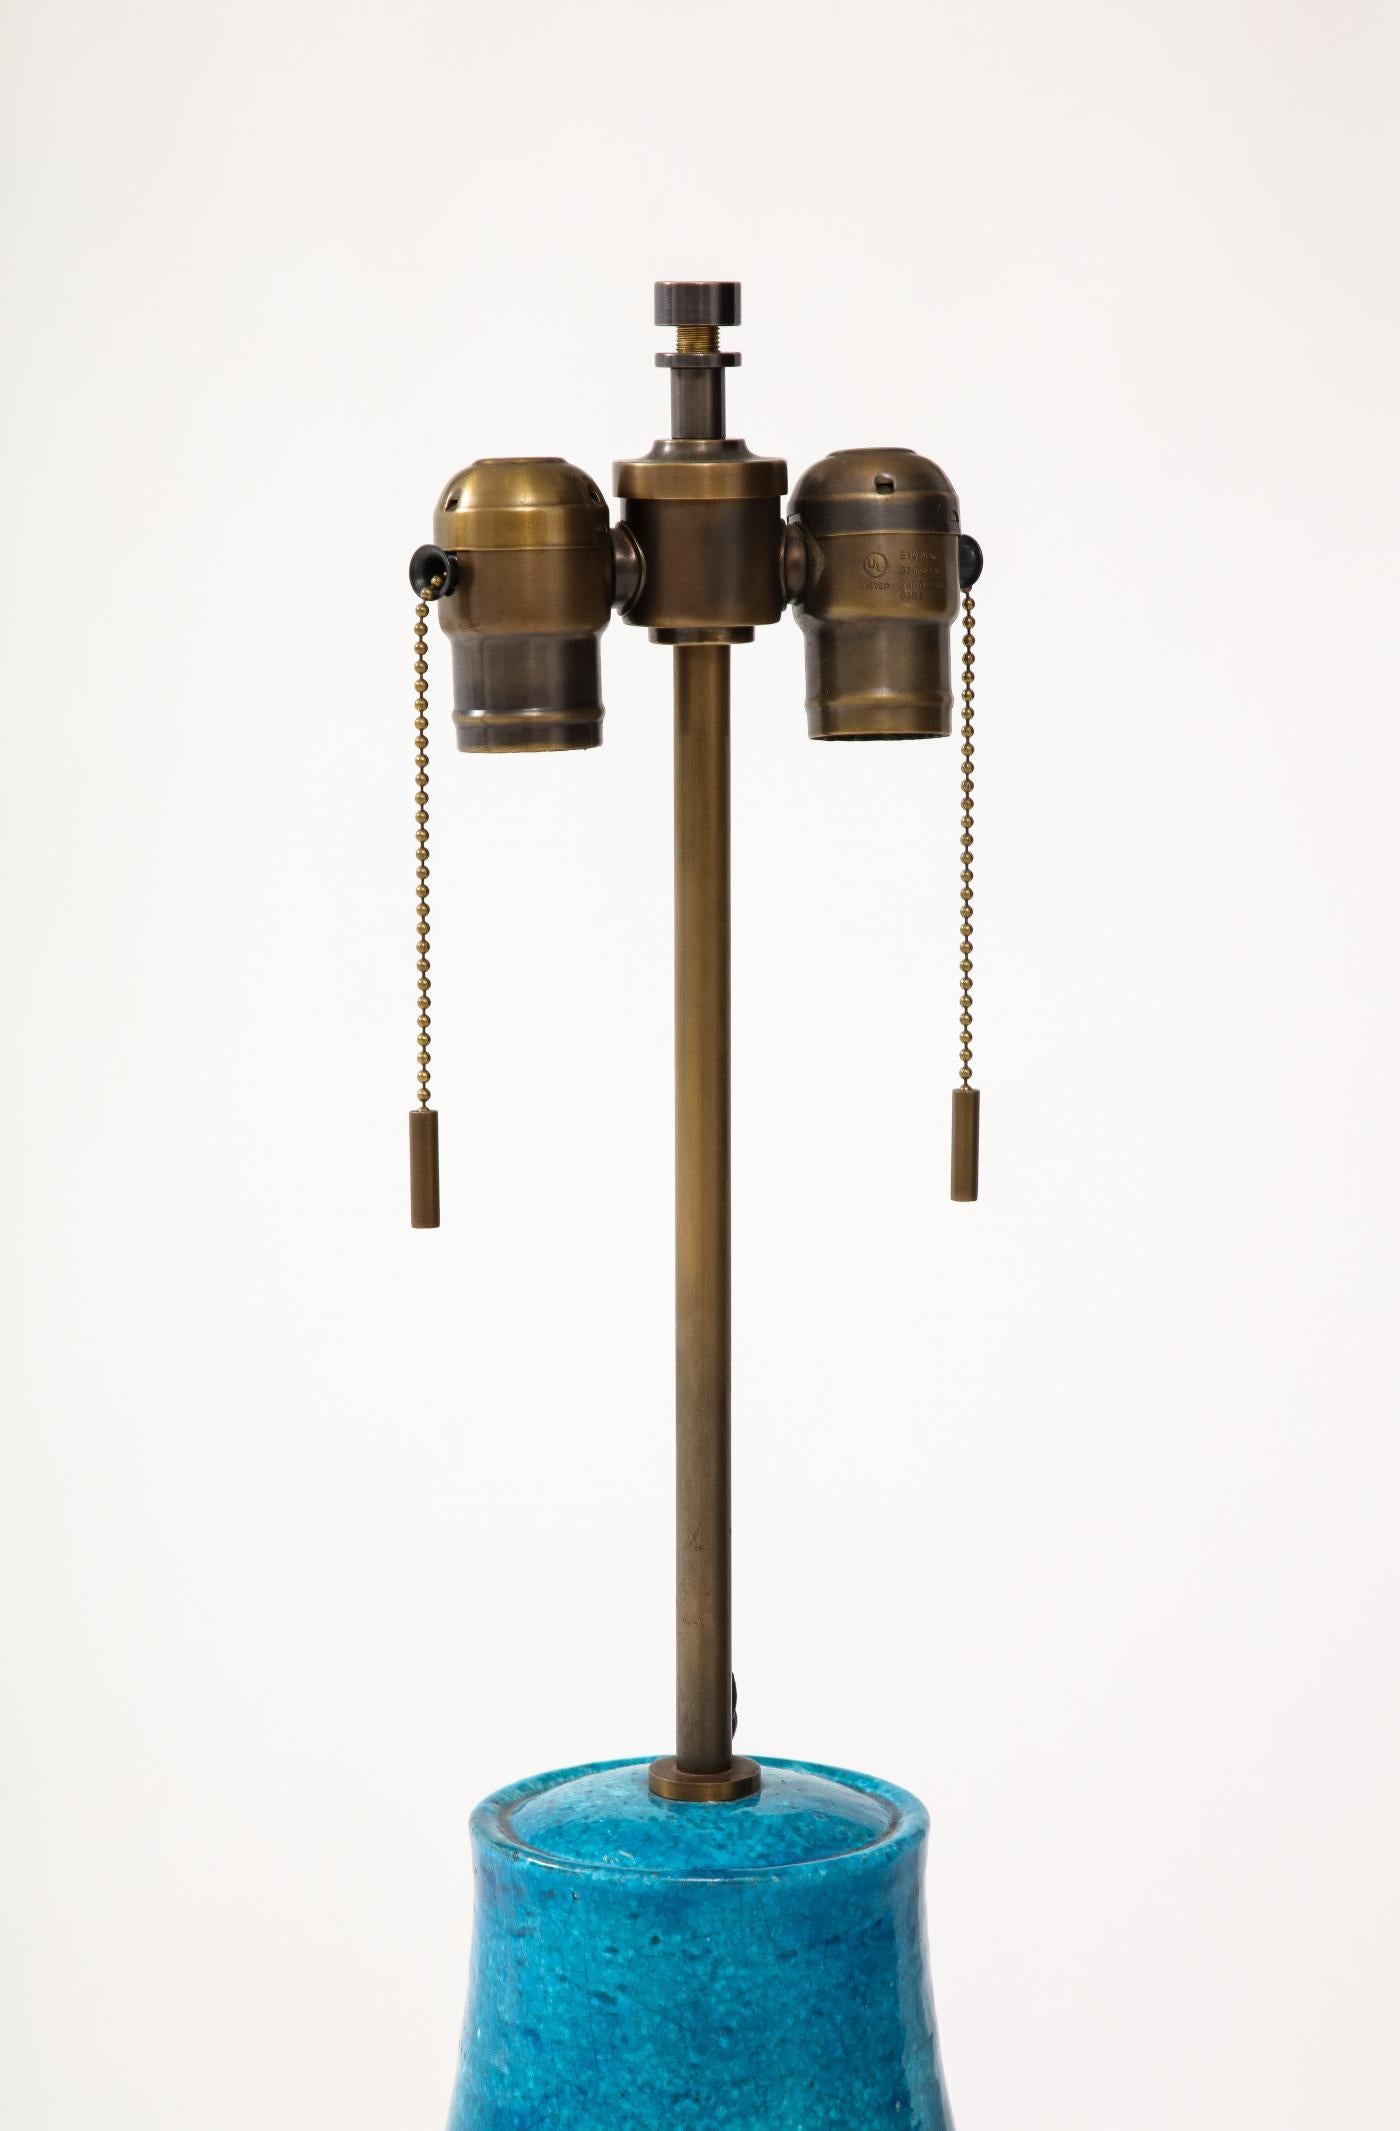 Modern Brass and Glazed Stoneware Monumental Table Lamp by Ugo Zaccagnini, c. 1950 For Sale